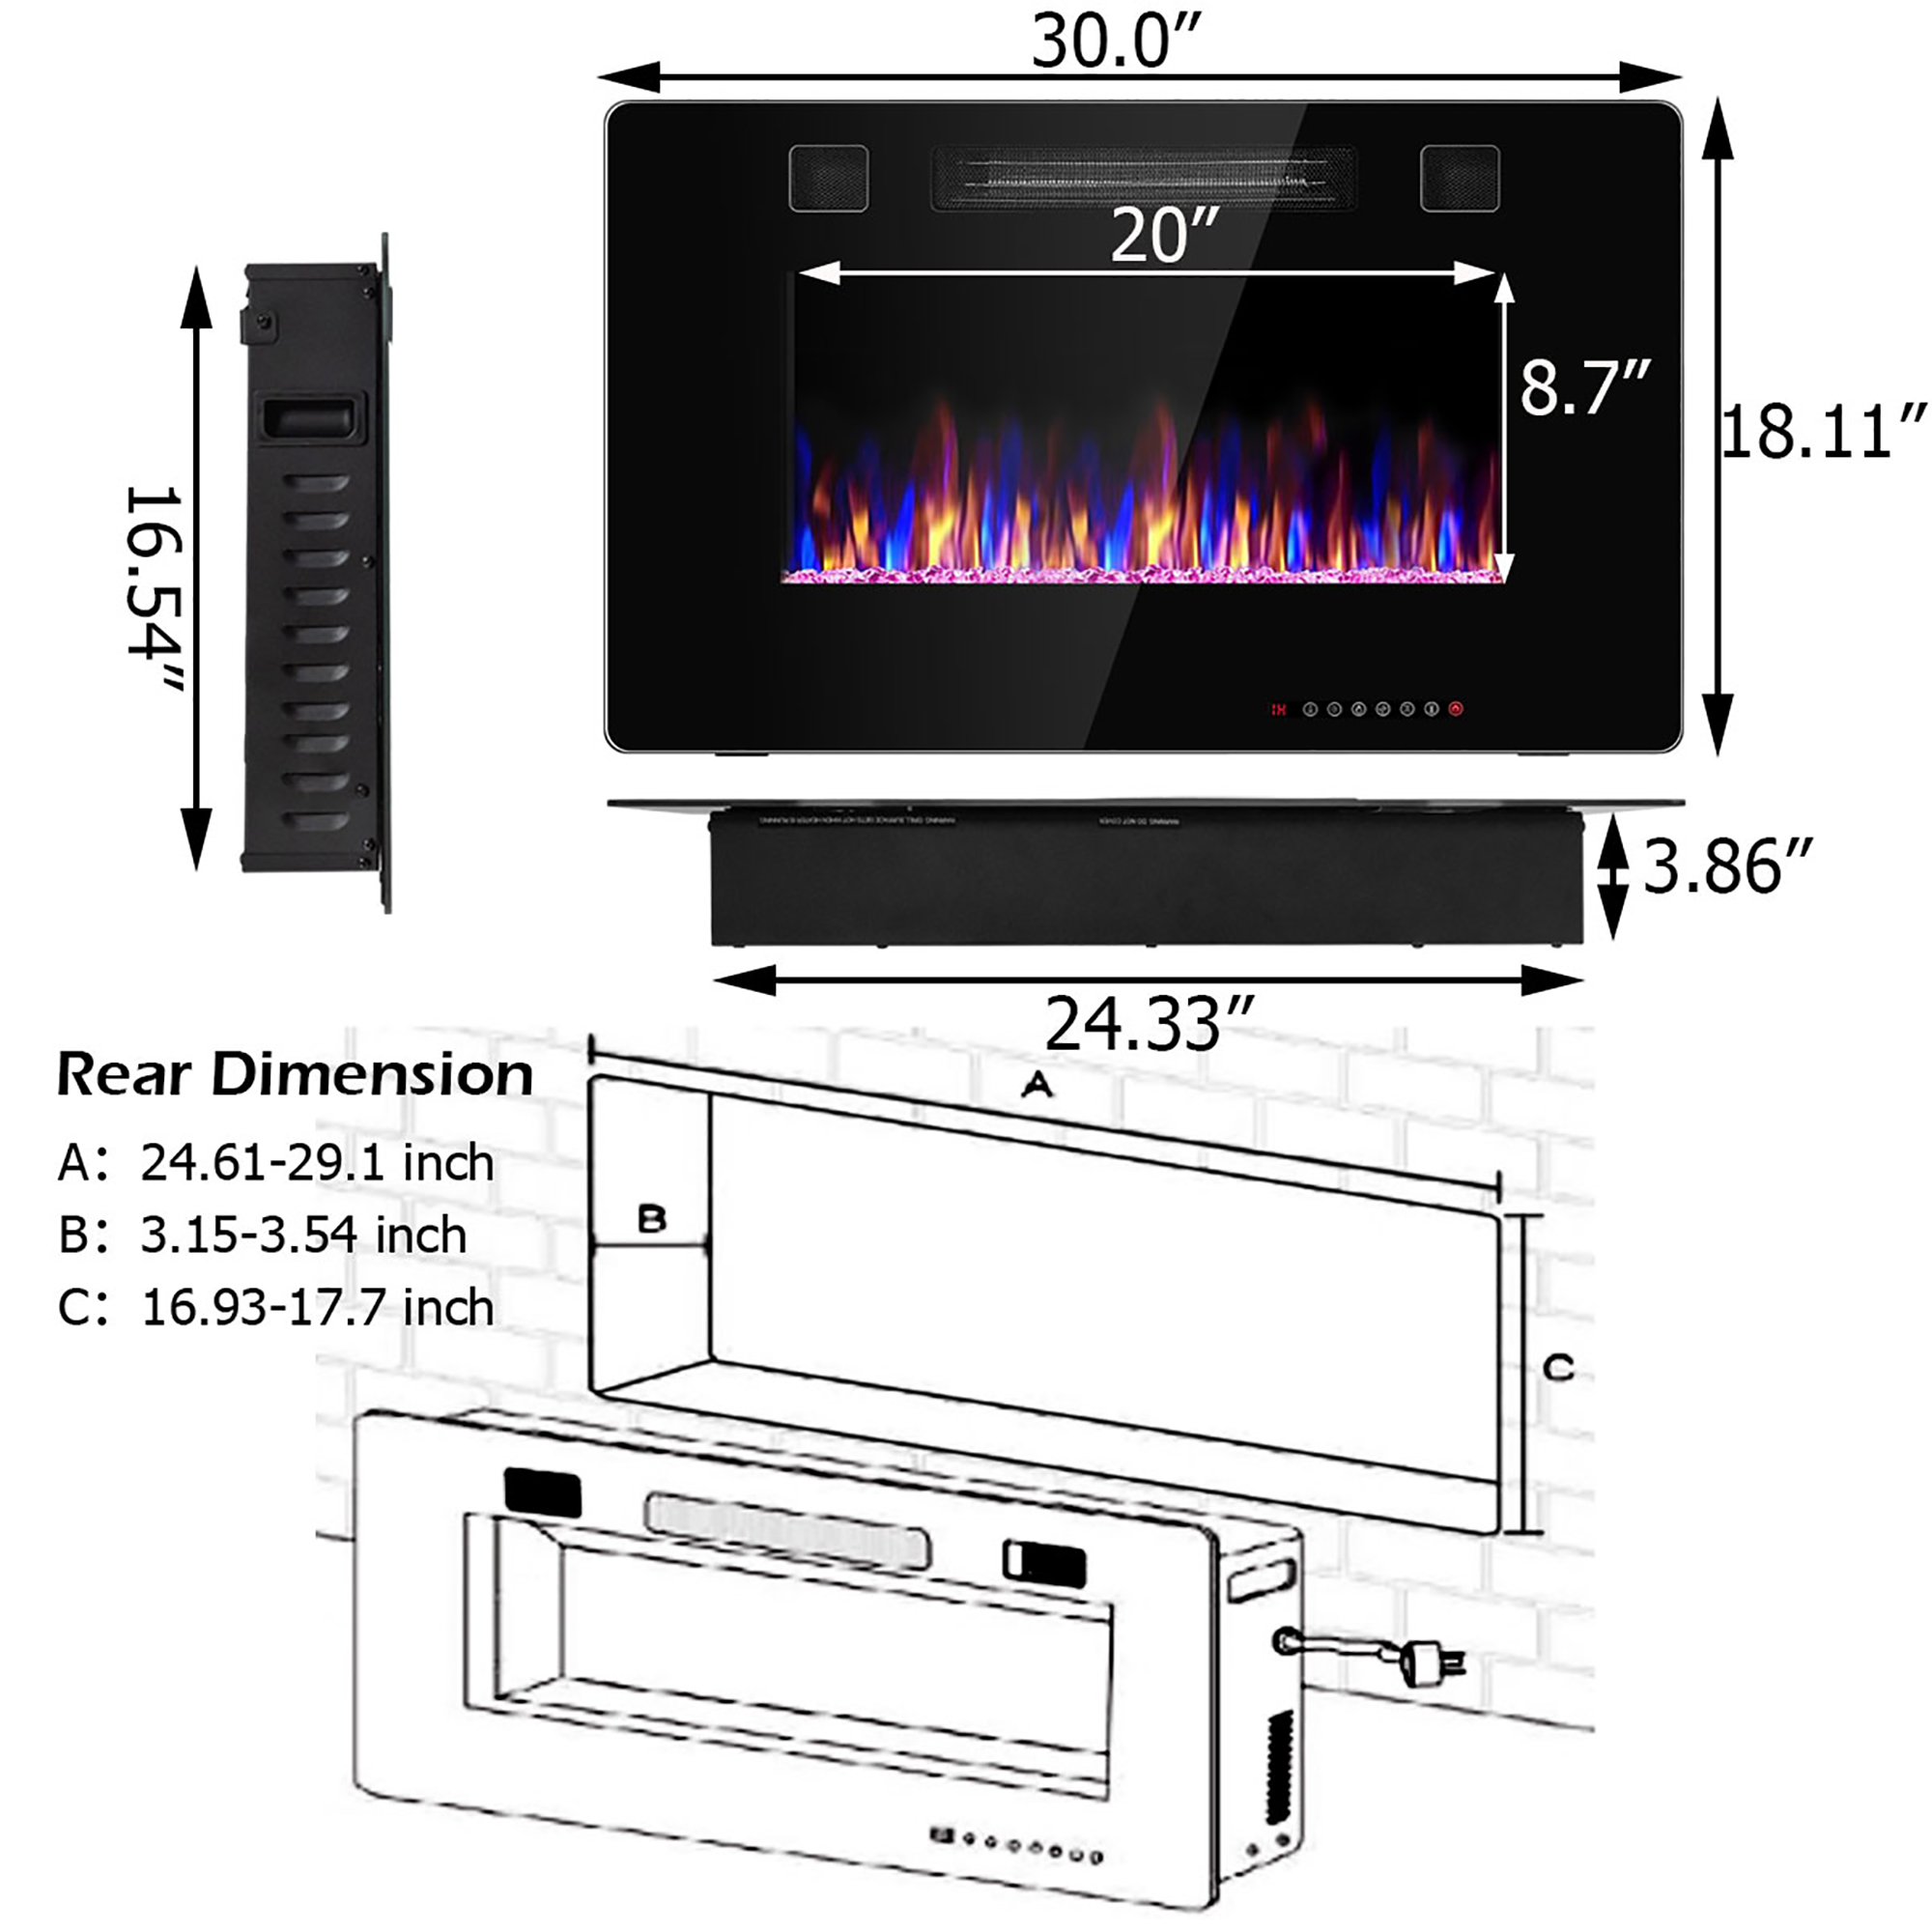 Costway 30'' Electric Indoor Fireplace Recessed Ultra Thin Wall Mounted Heater Multicolor Flame - image 4 of 9